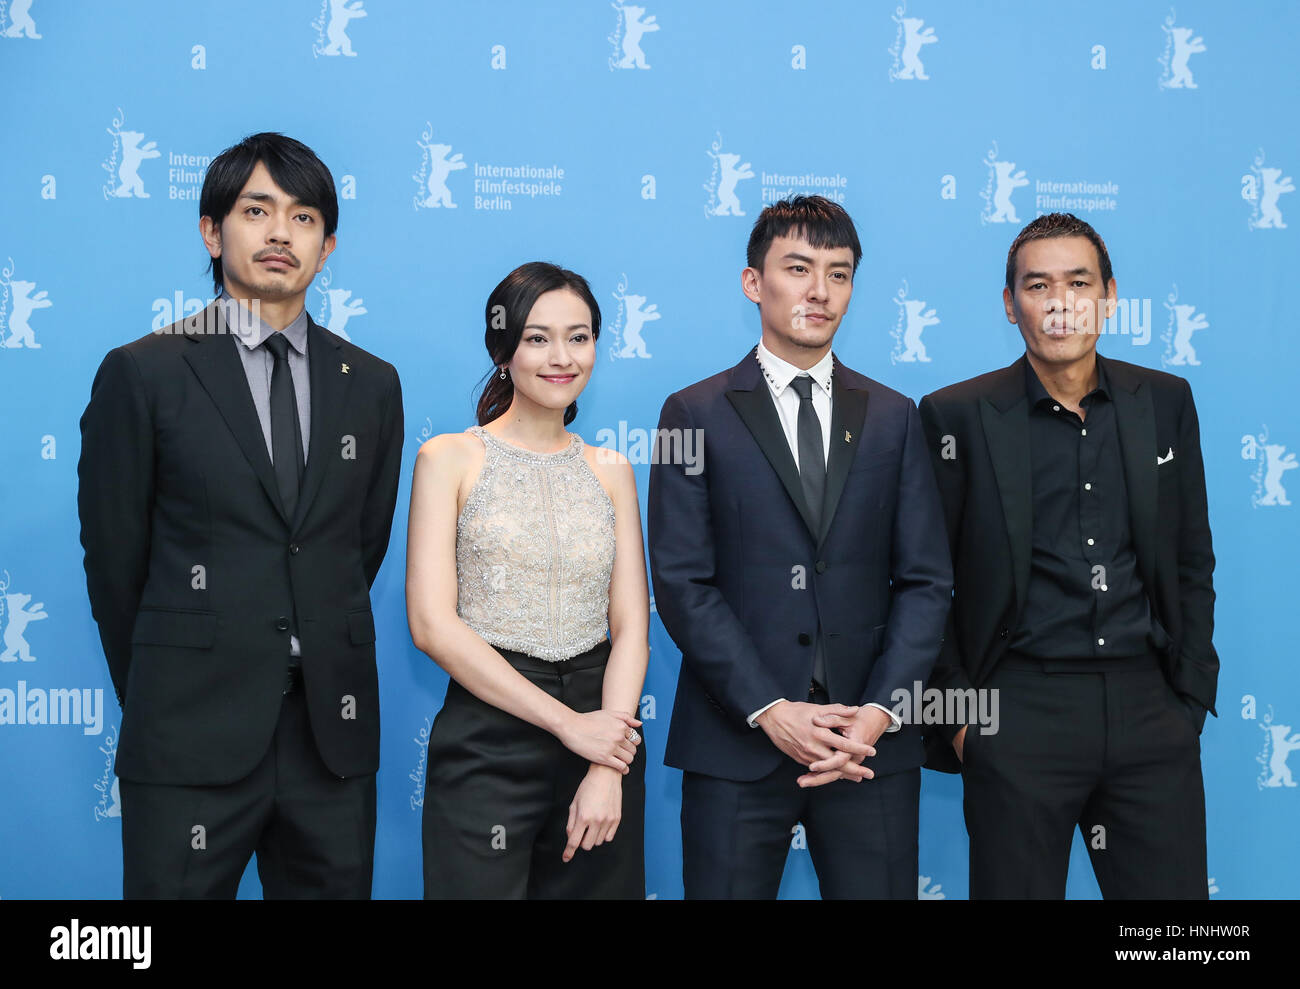 Berlin, Germany. 13th Feb, 2017. (From R to L) Director Sabu, actor Chang Chen, actress Yao Yiti and actor Sho Aoyagi attend a photocall of film 'Mr. Long' during the 67th Berlin International Film Festival in Berlin, capital of Germany, on Feb. 13, 2017. Credit: Shan Yuqi/Xinhua/Alamy Live News Stock Photo